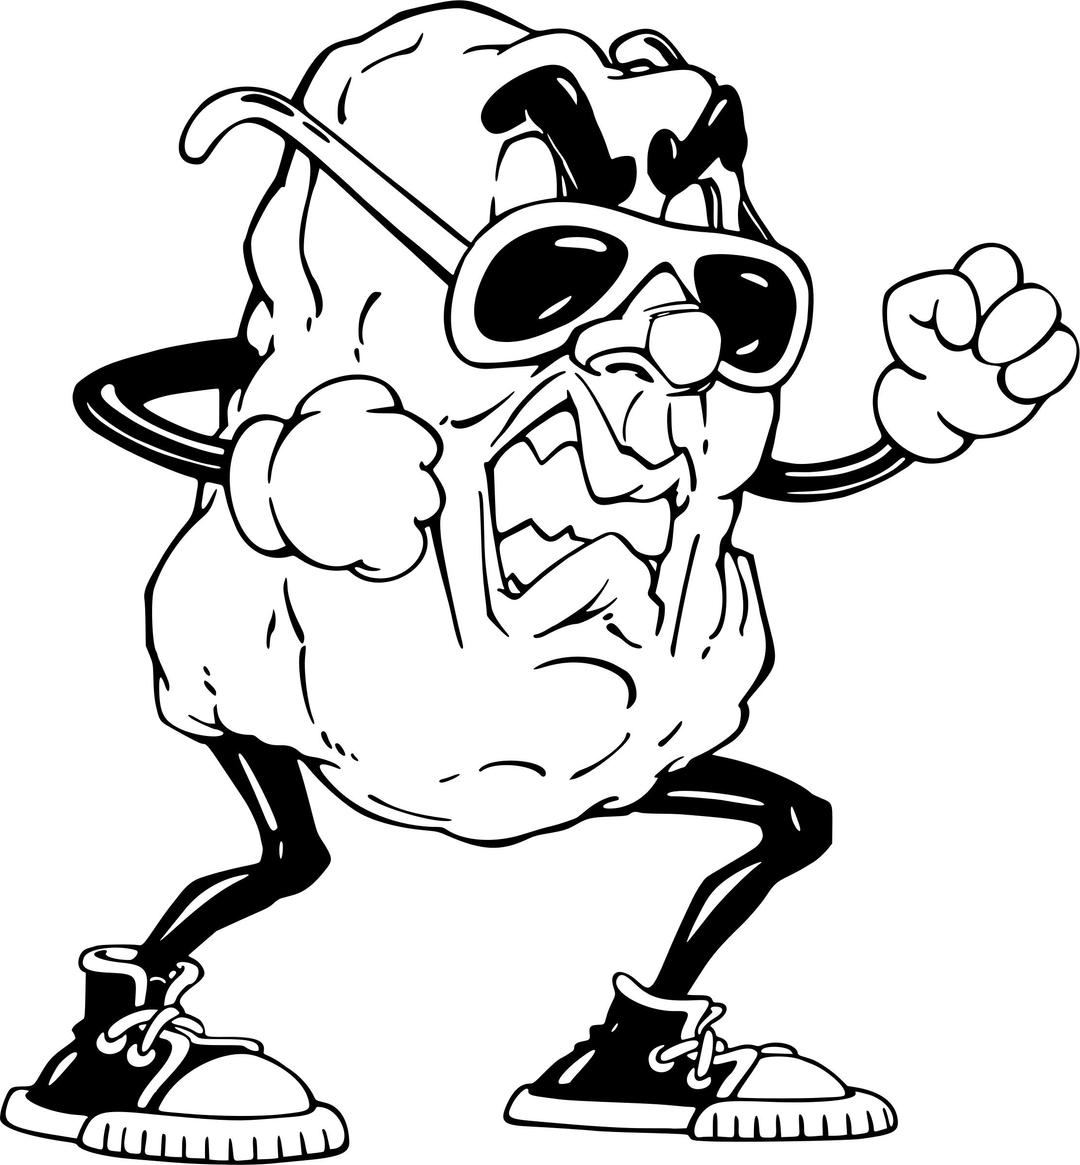 Angry raisin png transparent